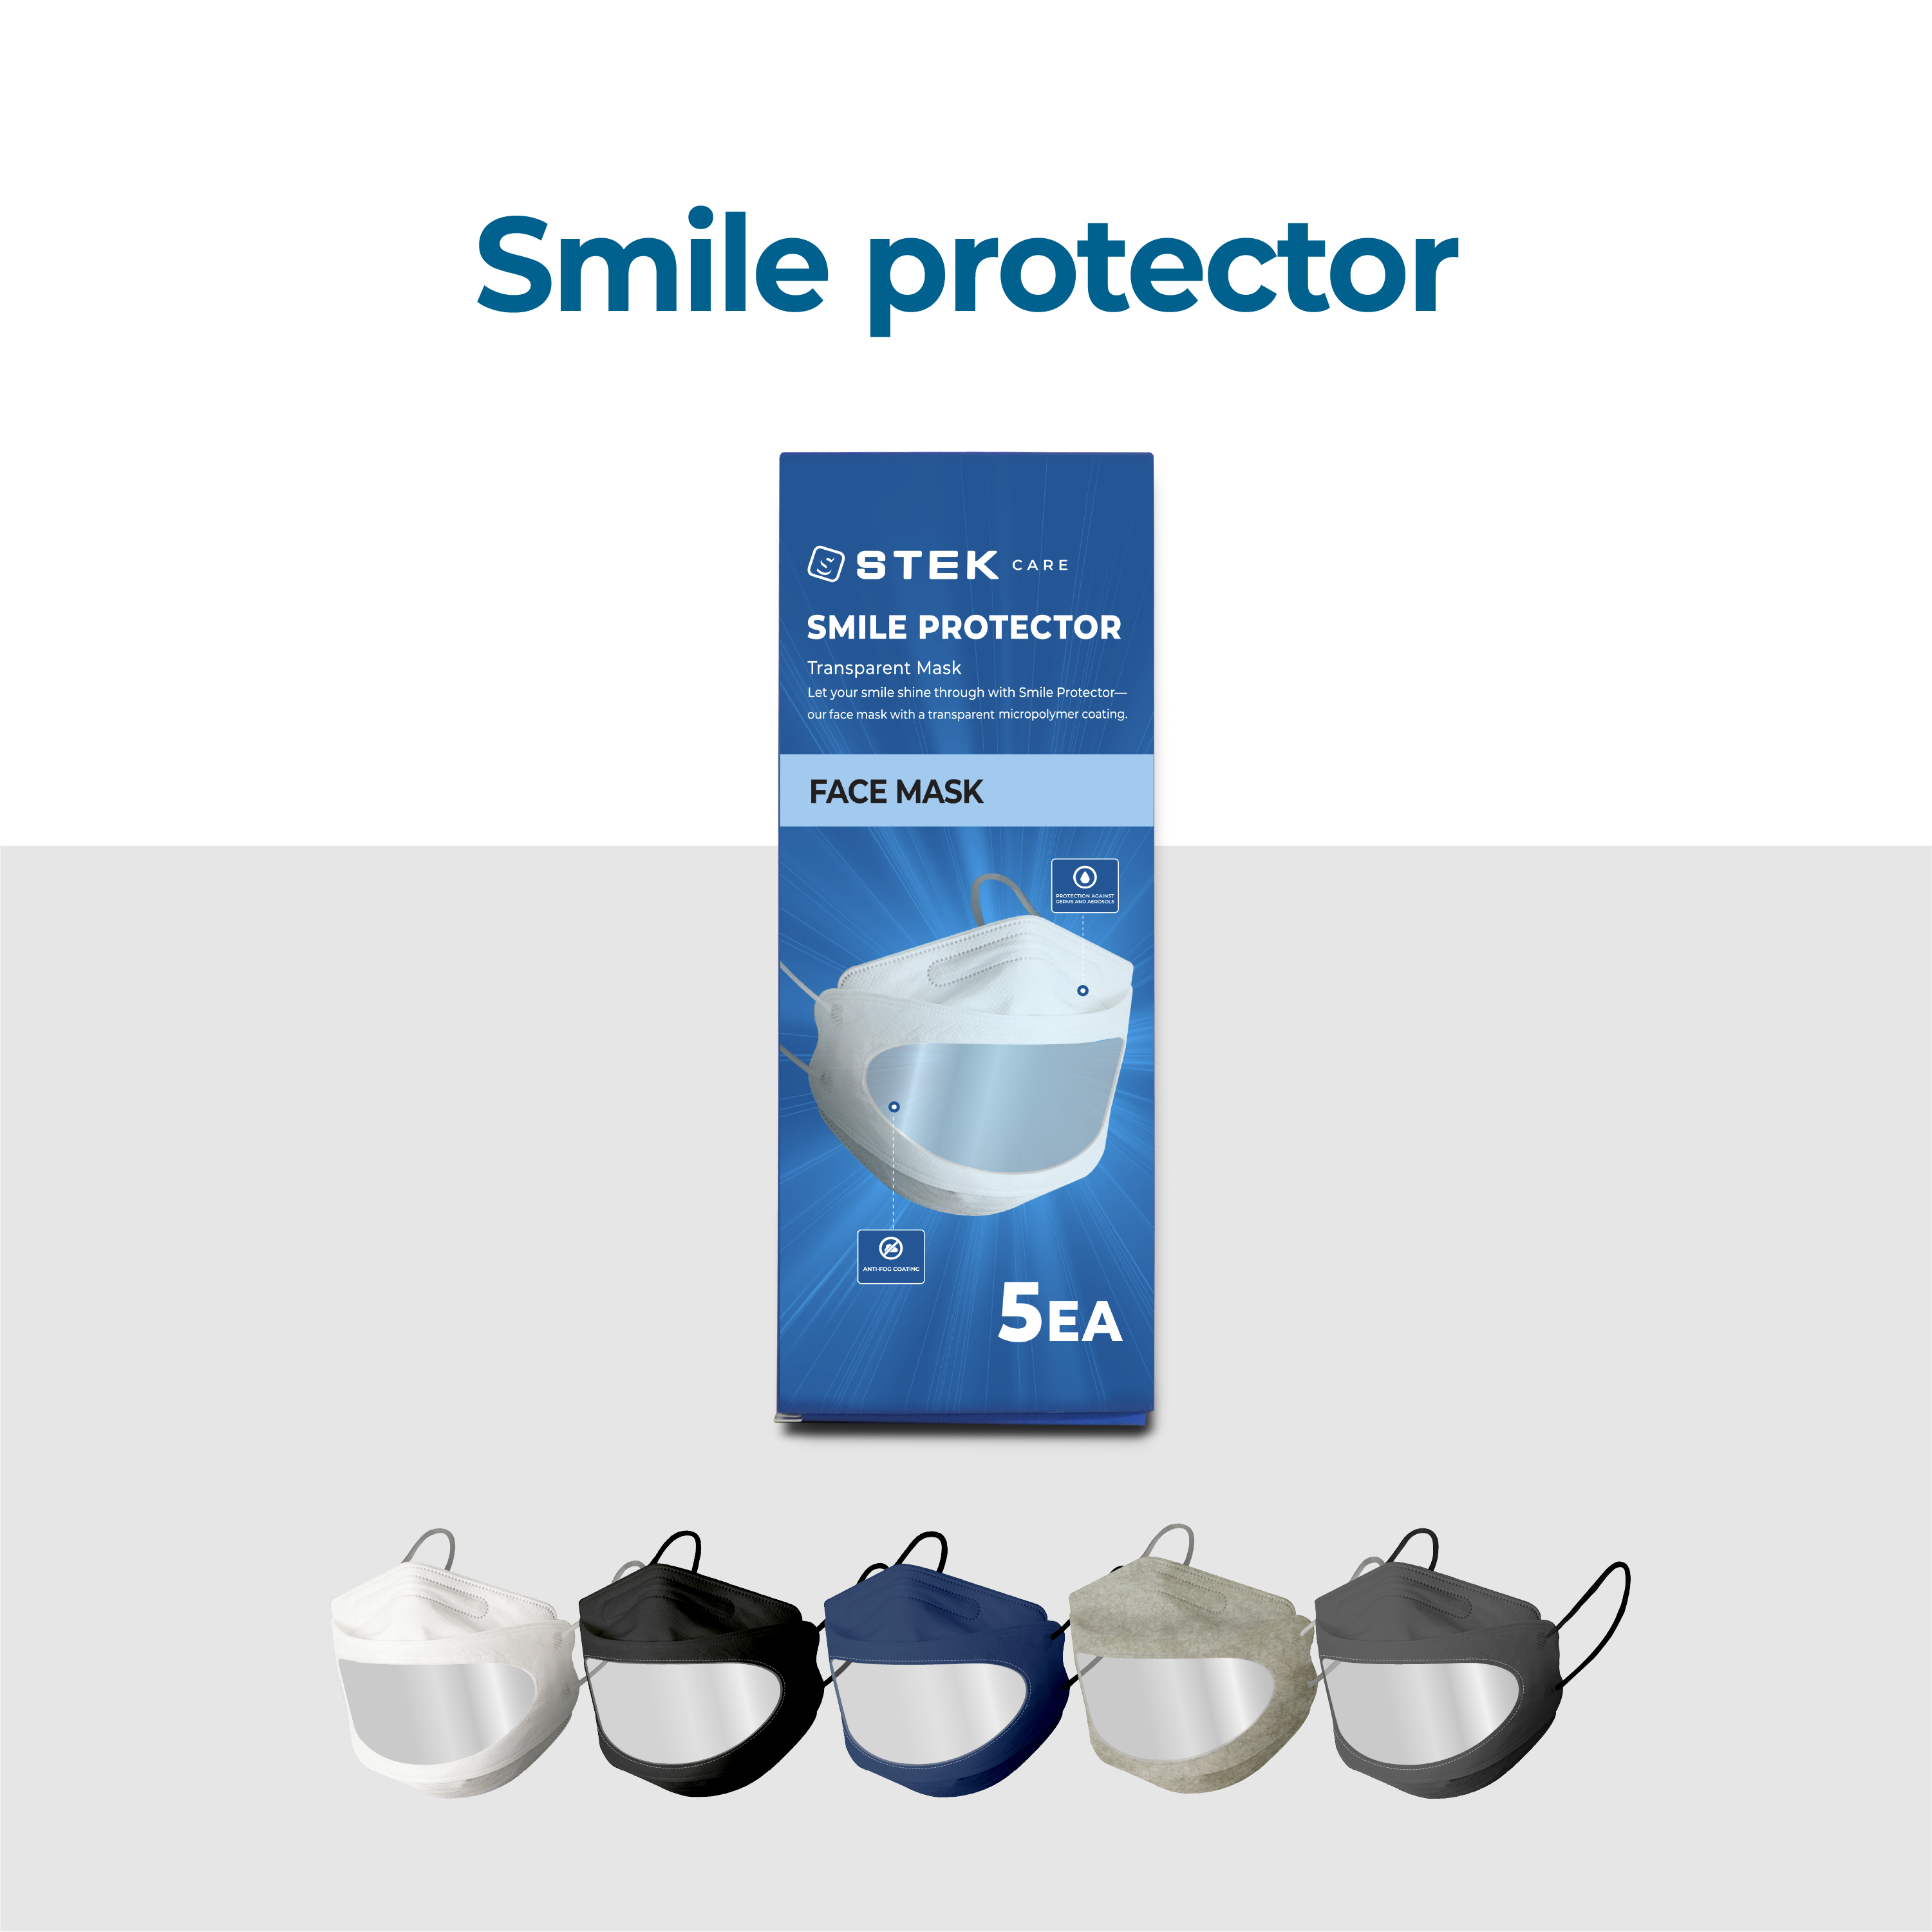 STEK Smile Protector 5EA Clear face mask for adults Anti fog Reusable See Through Masks _5 colors_